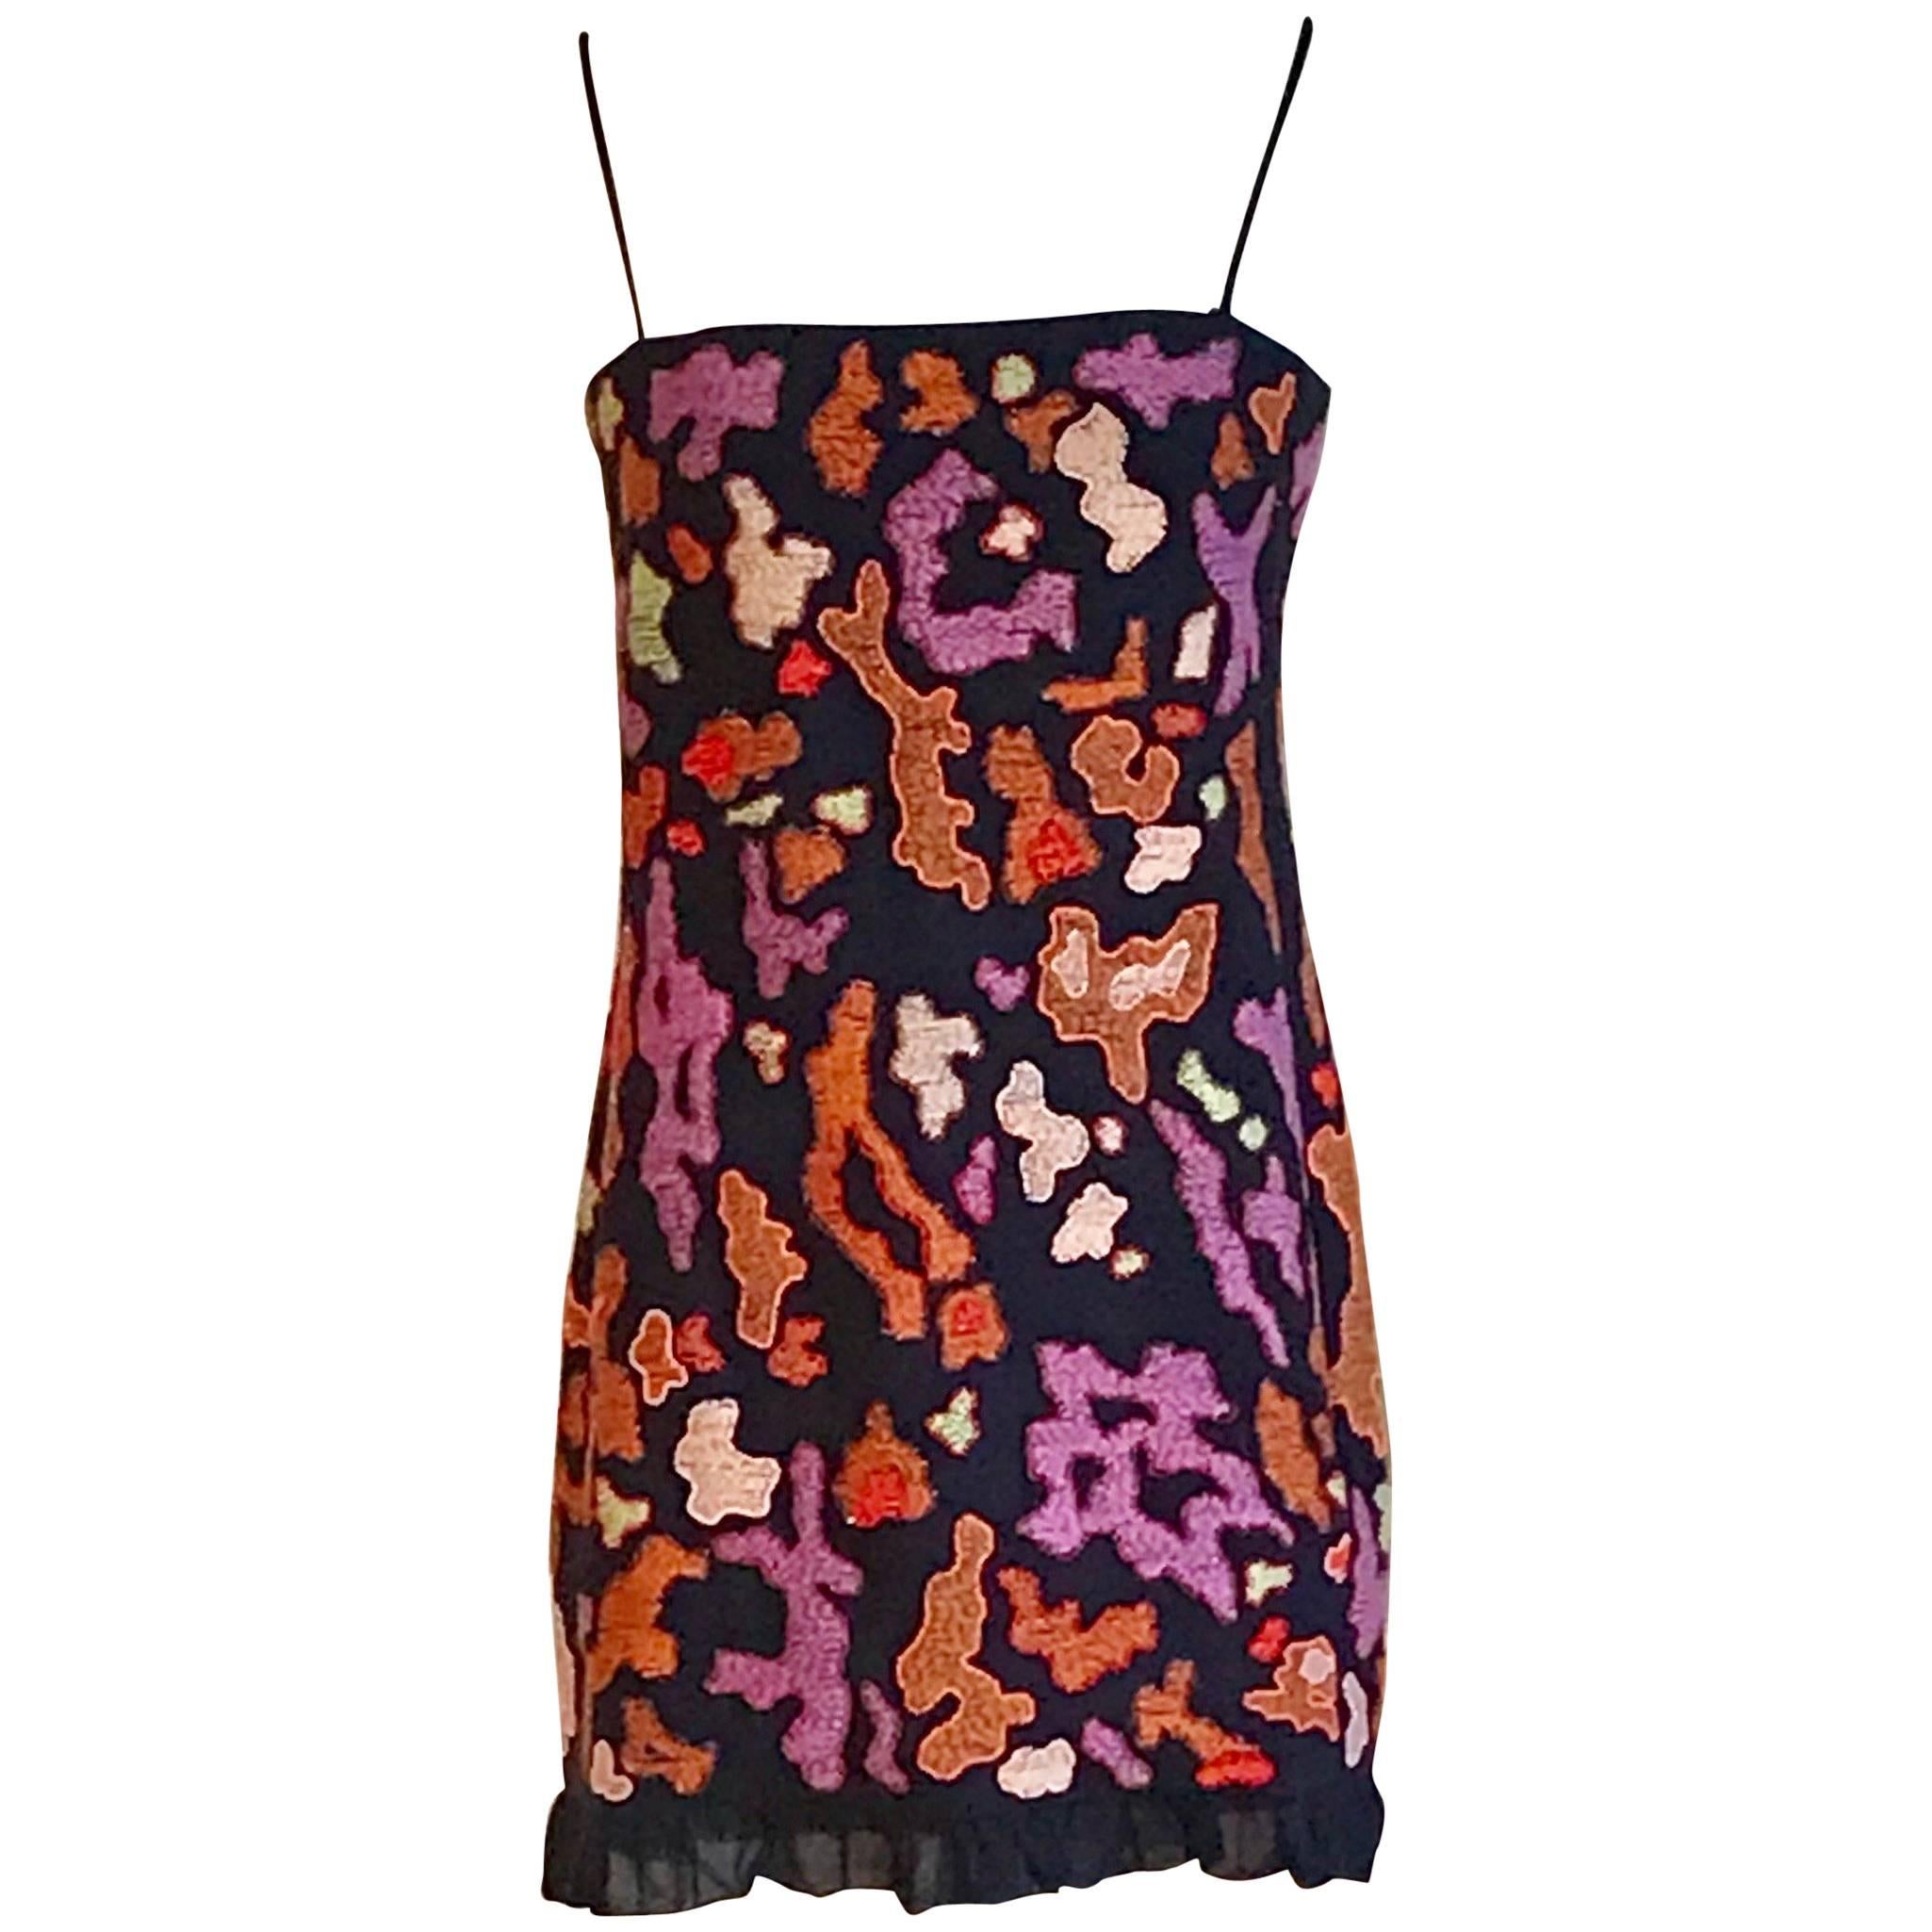 Chanel 1997 Black Embroidered Beaded Multicolor Abstract Design Mini Dress